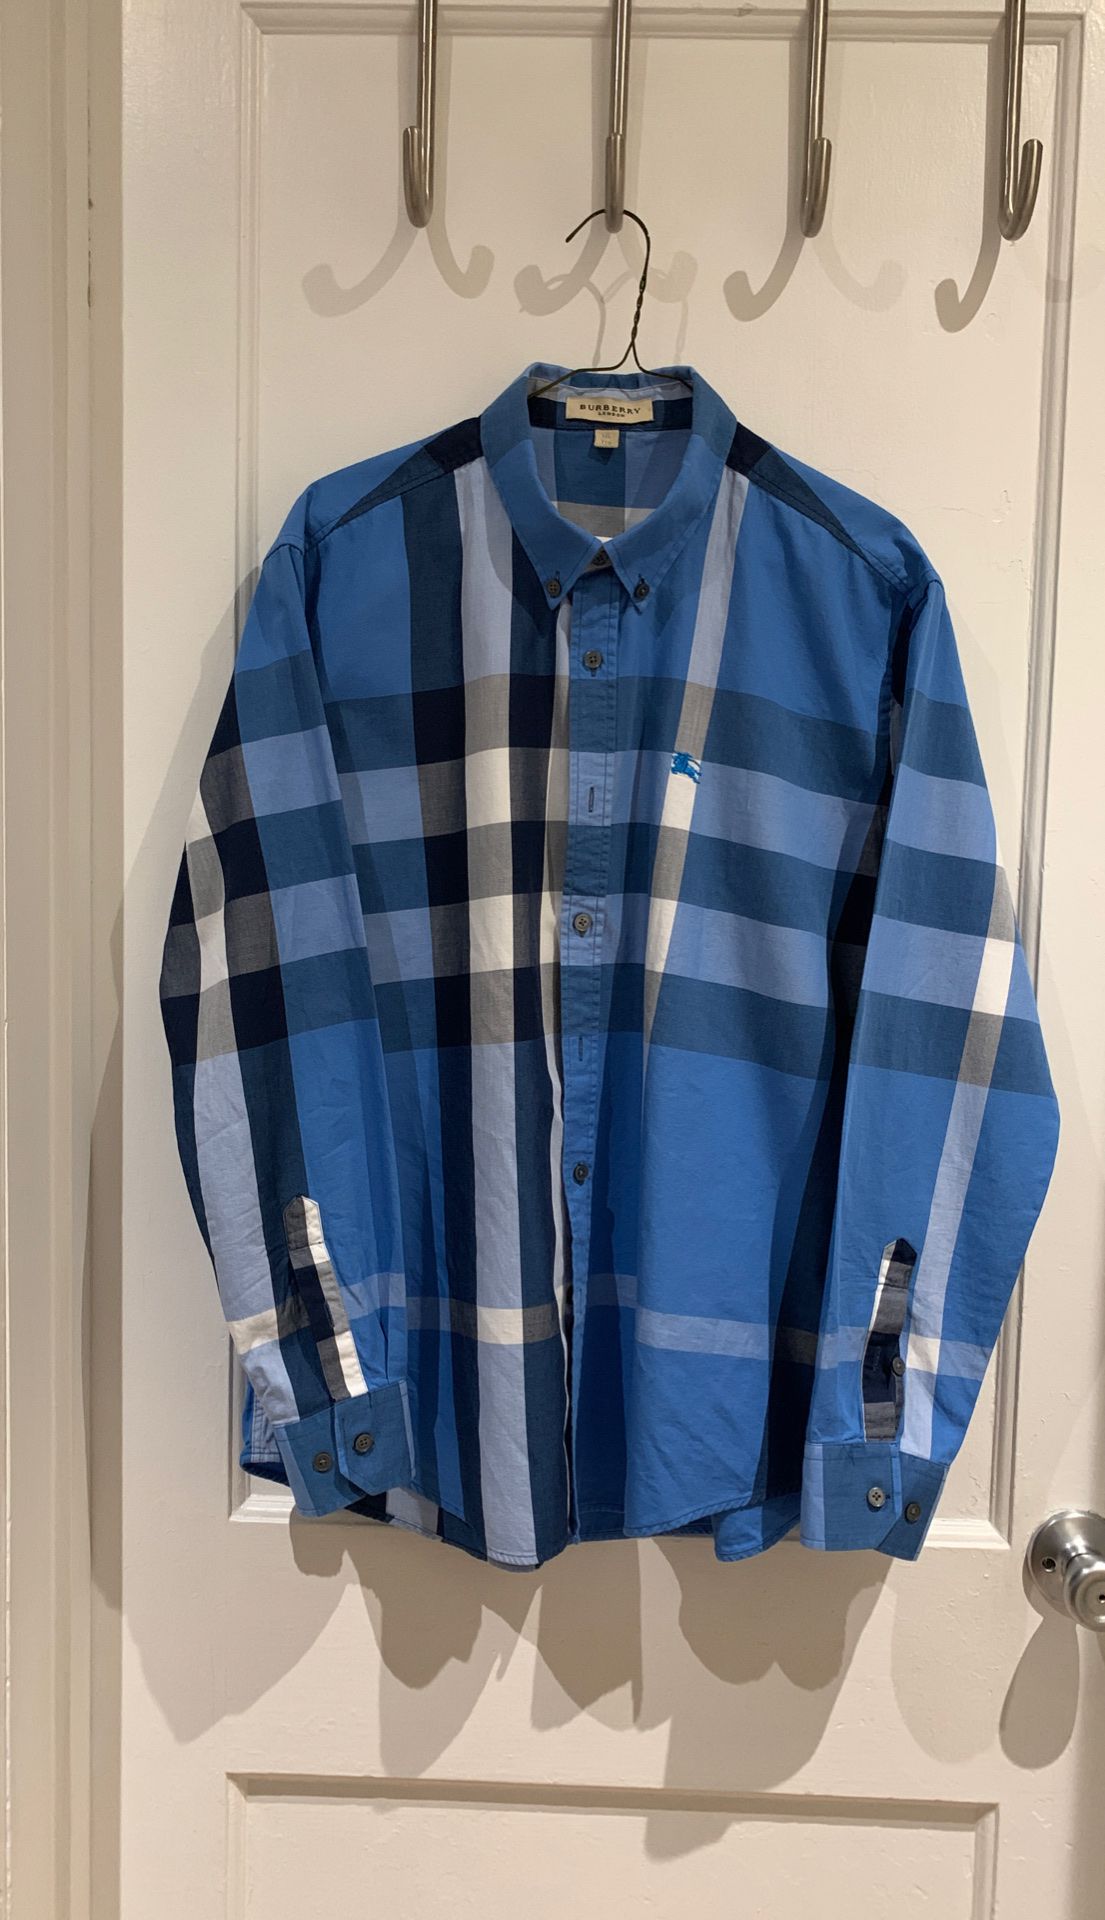 Burberry Blue and Navy Striped Button Up